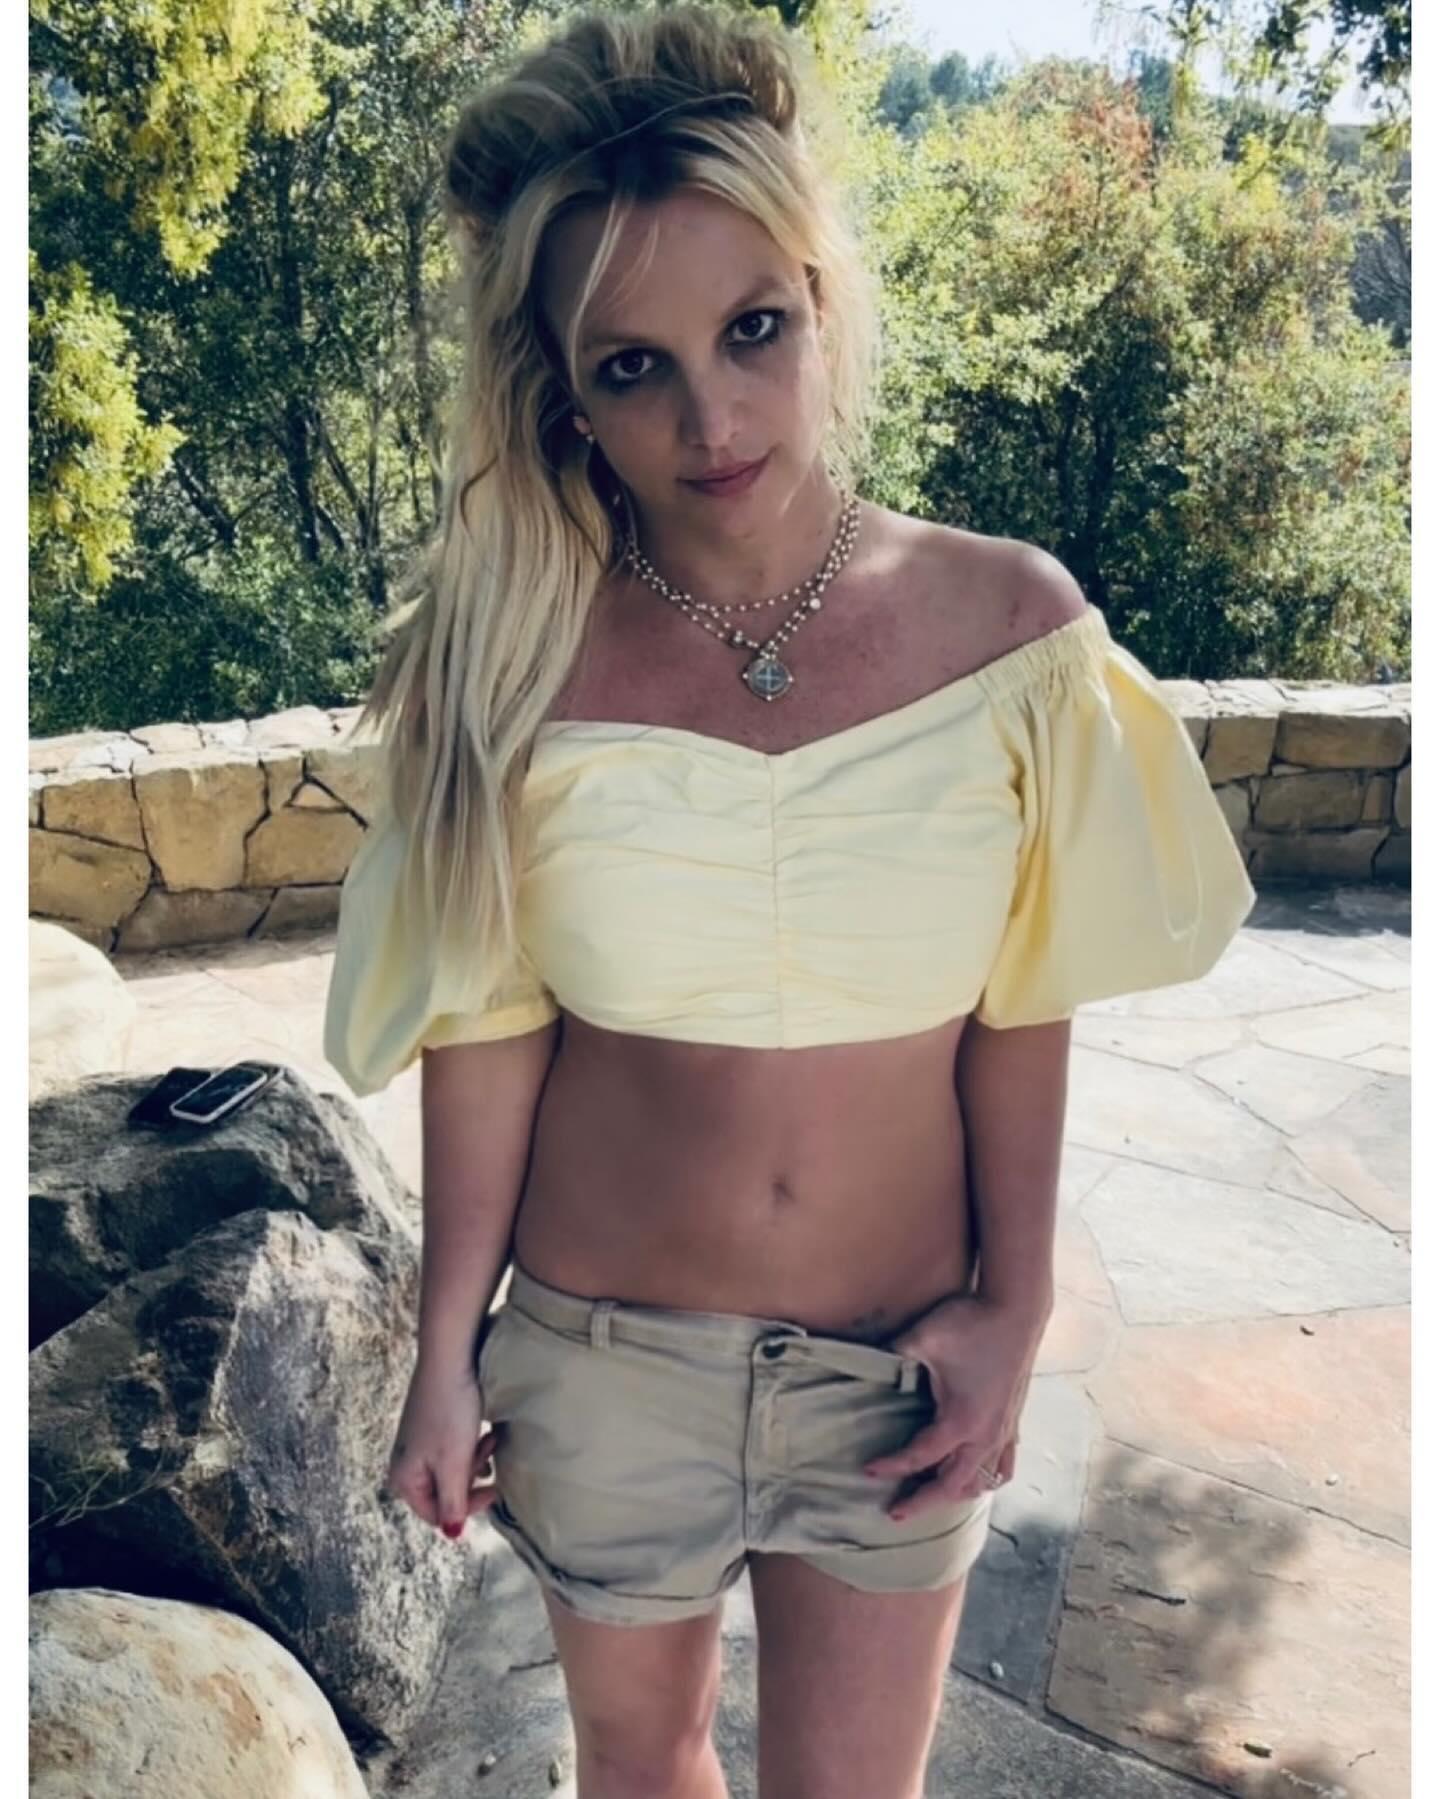 Britney Spears shares photo of 'River'